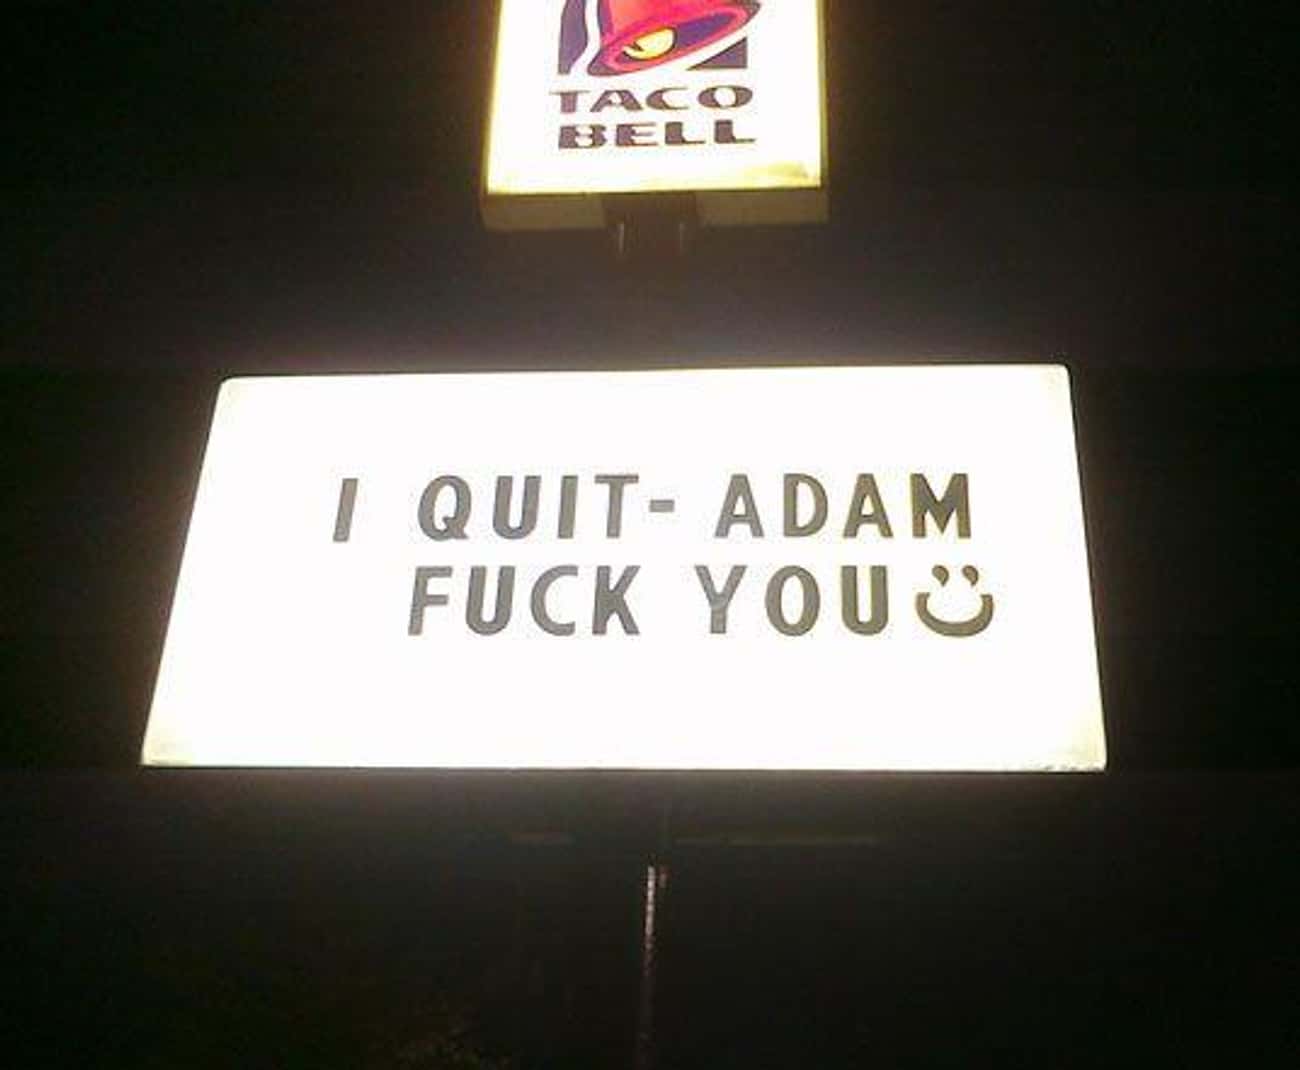 Quitting Like a Boss